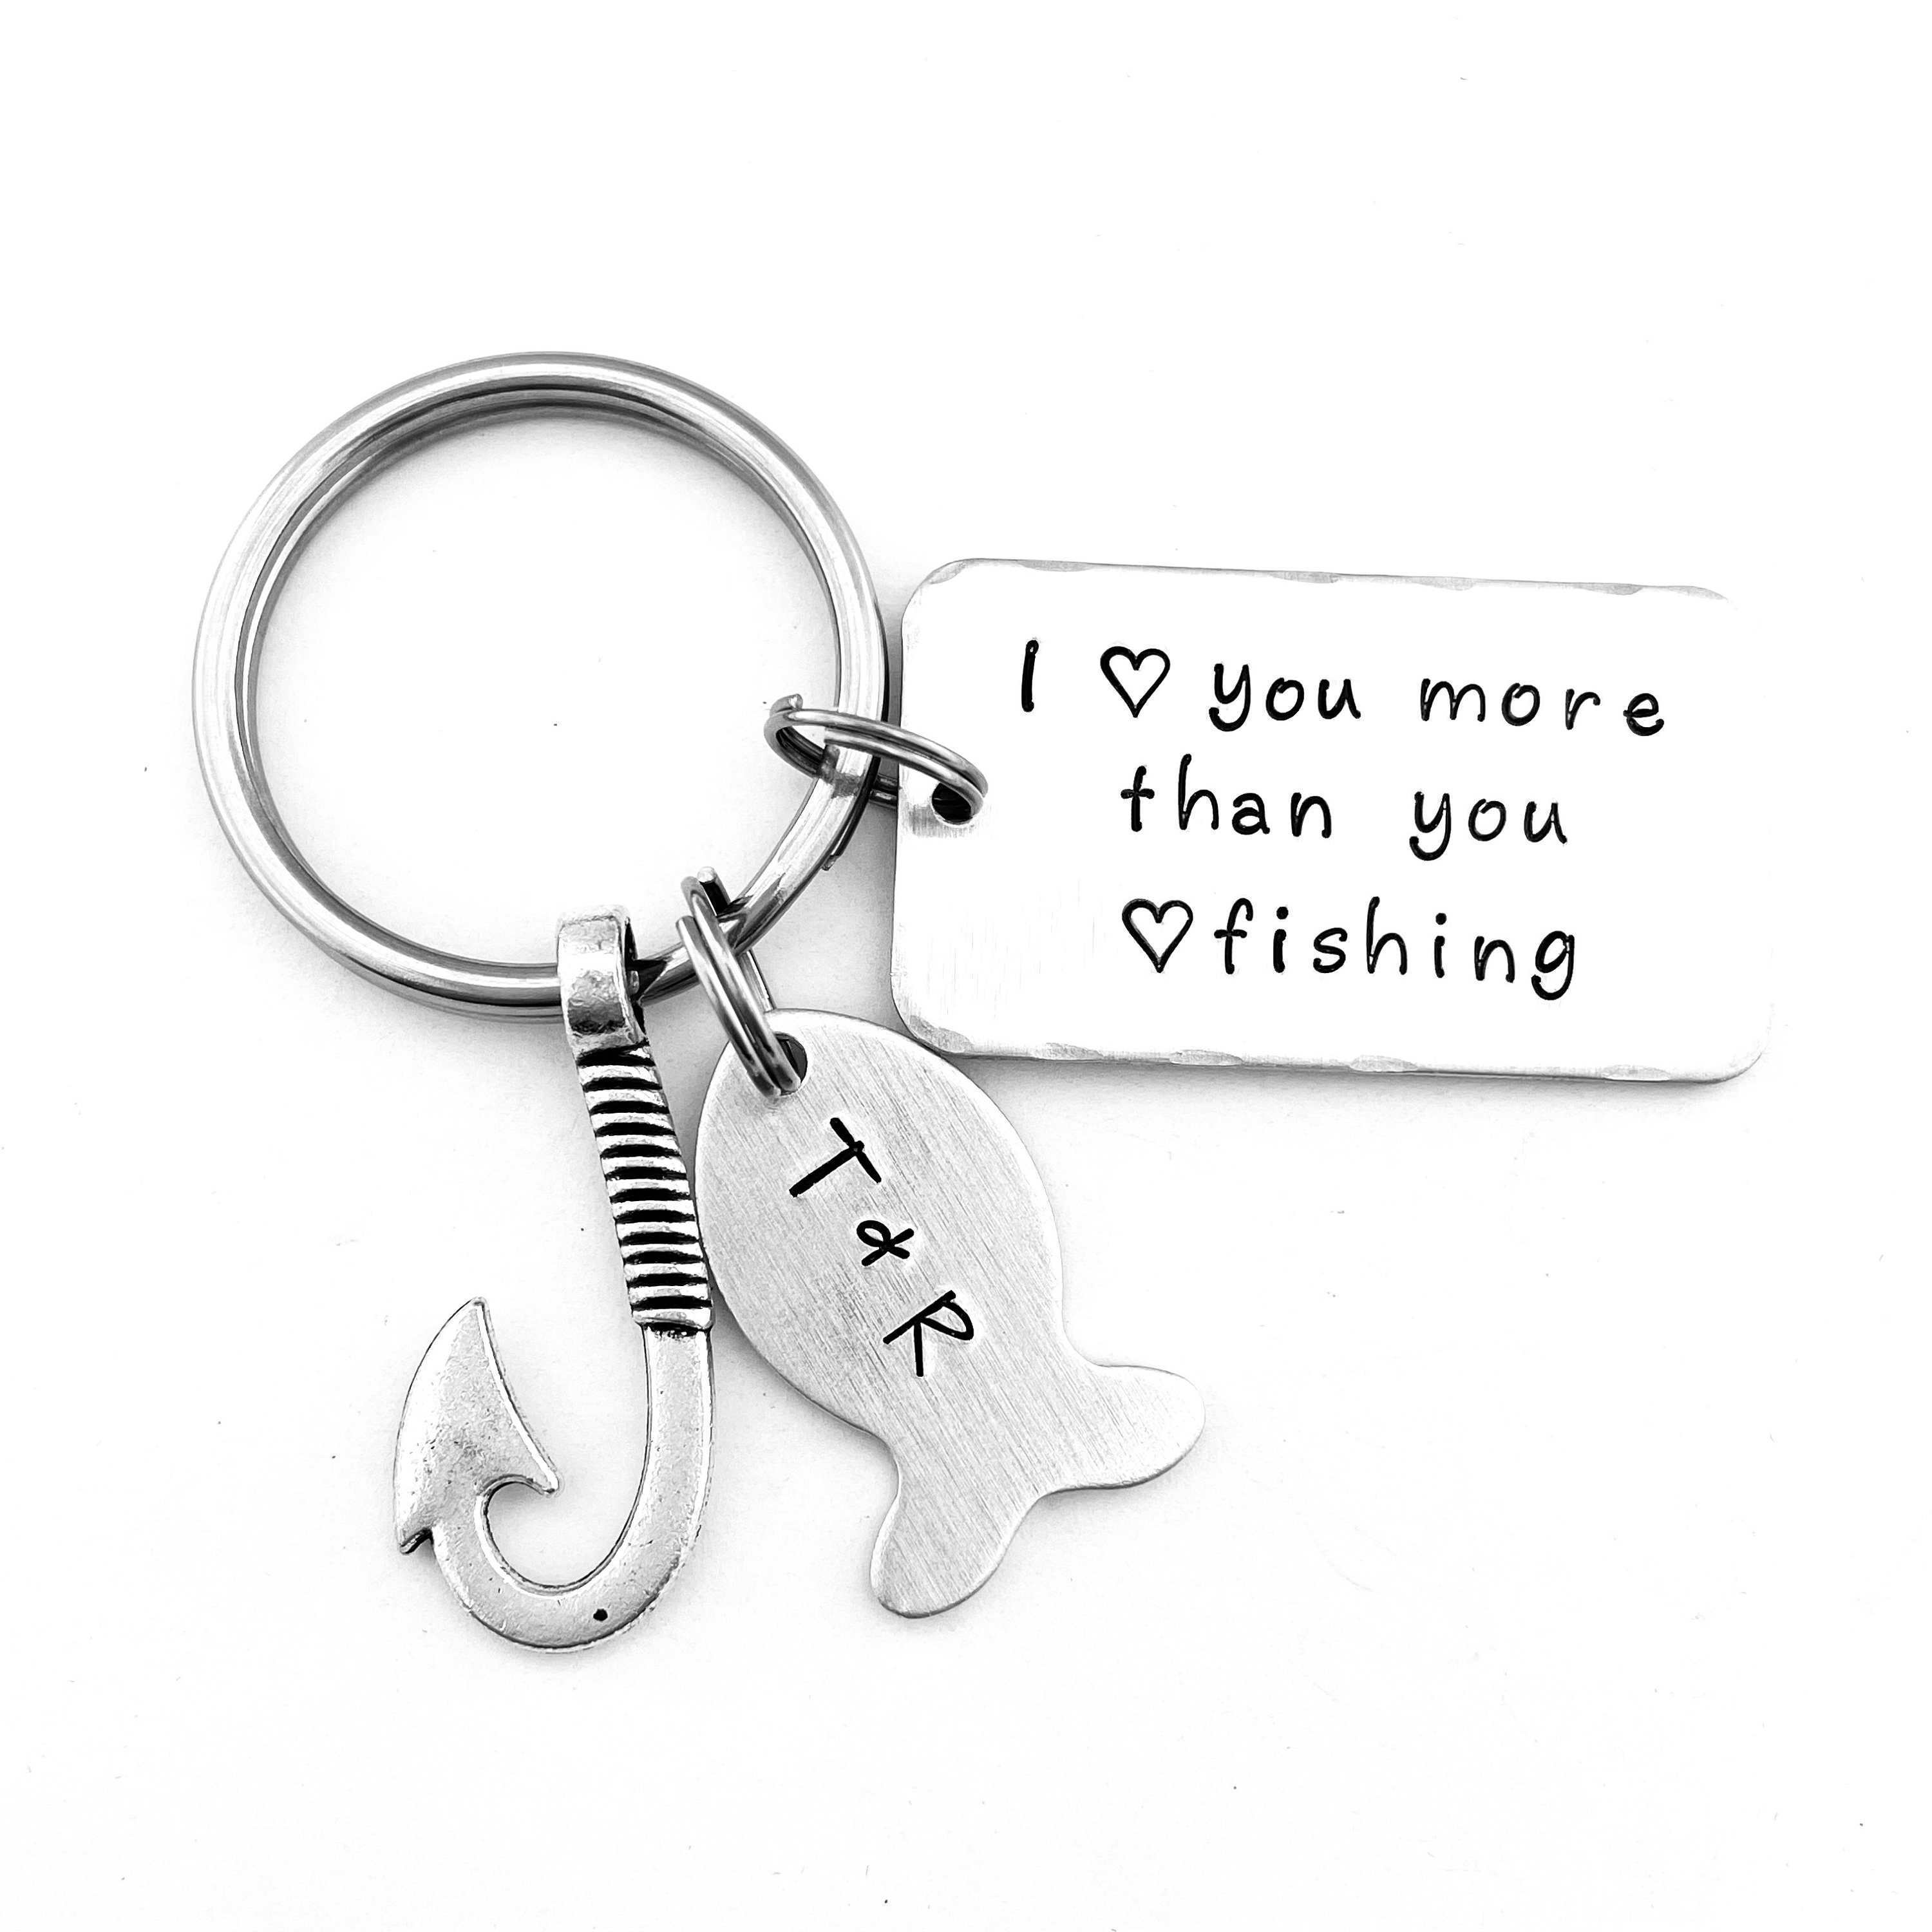 I Love You More Than You Love Fishing Personalized Hand Stamped